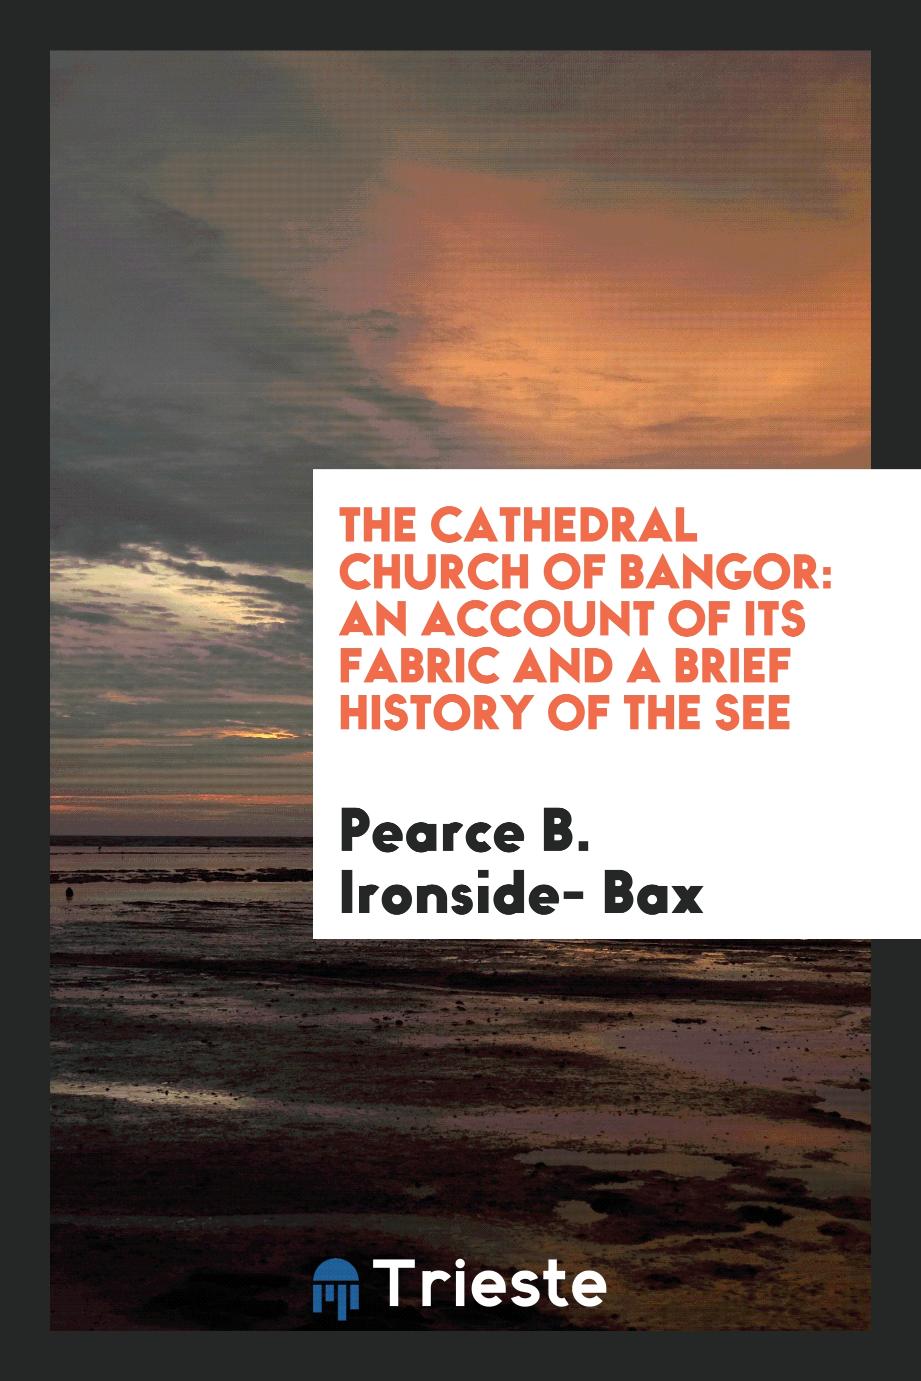 The Cathedral Church of Bangor: An Account of Its Fabric and a Brief History of the See